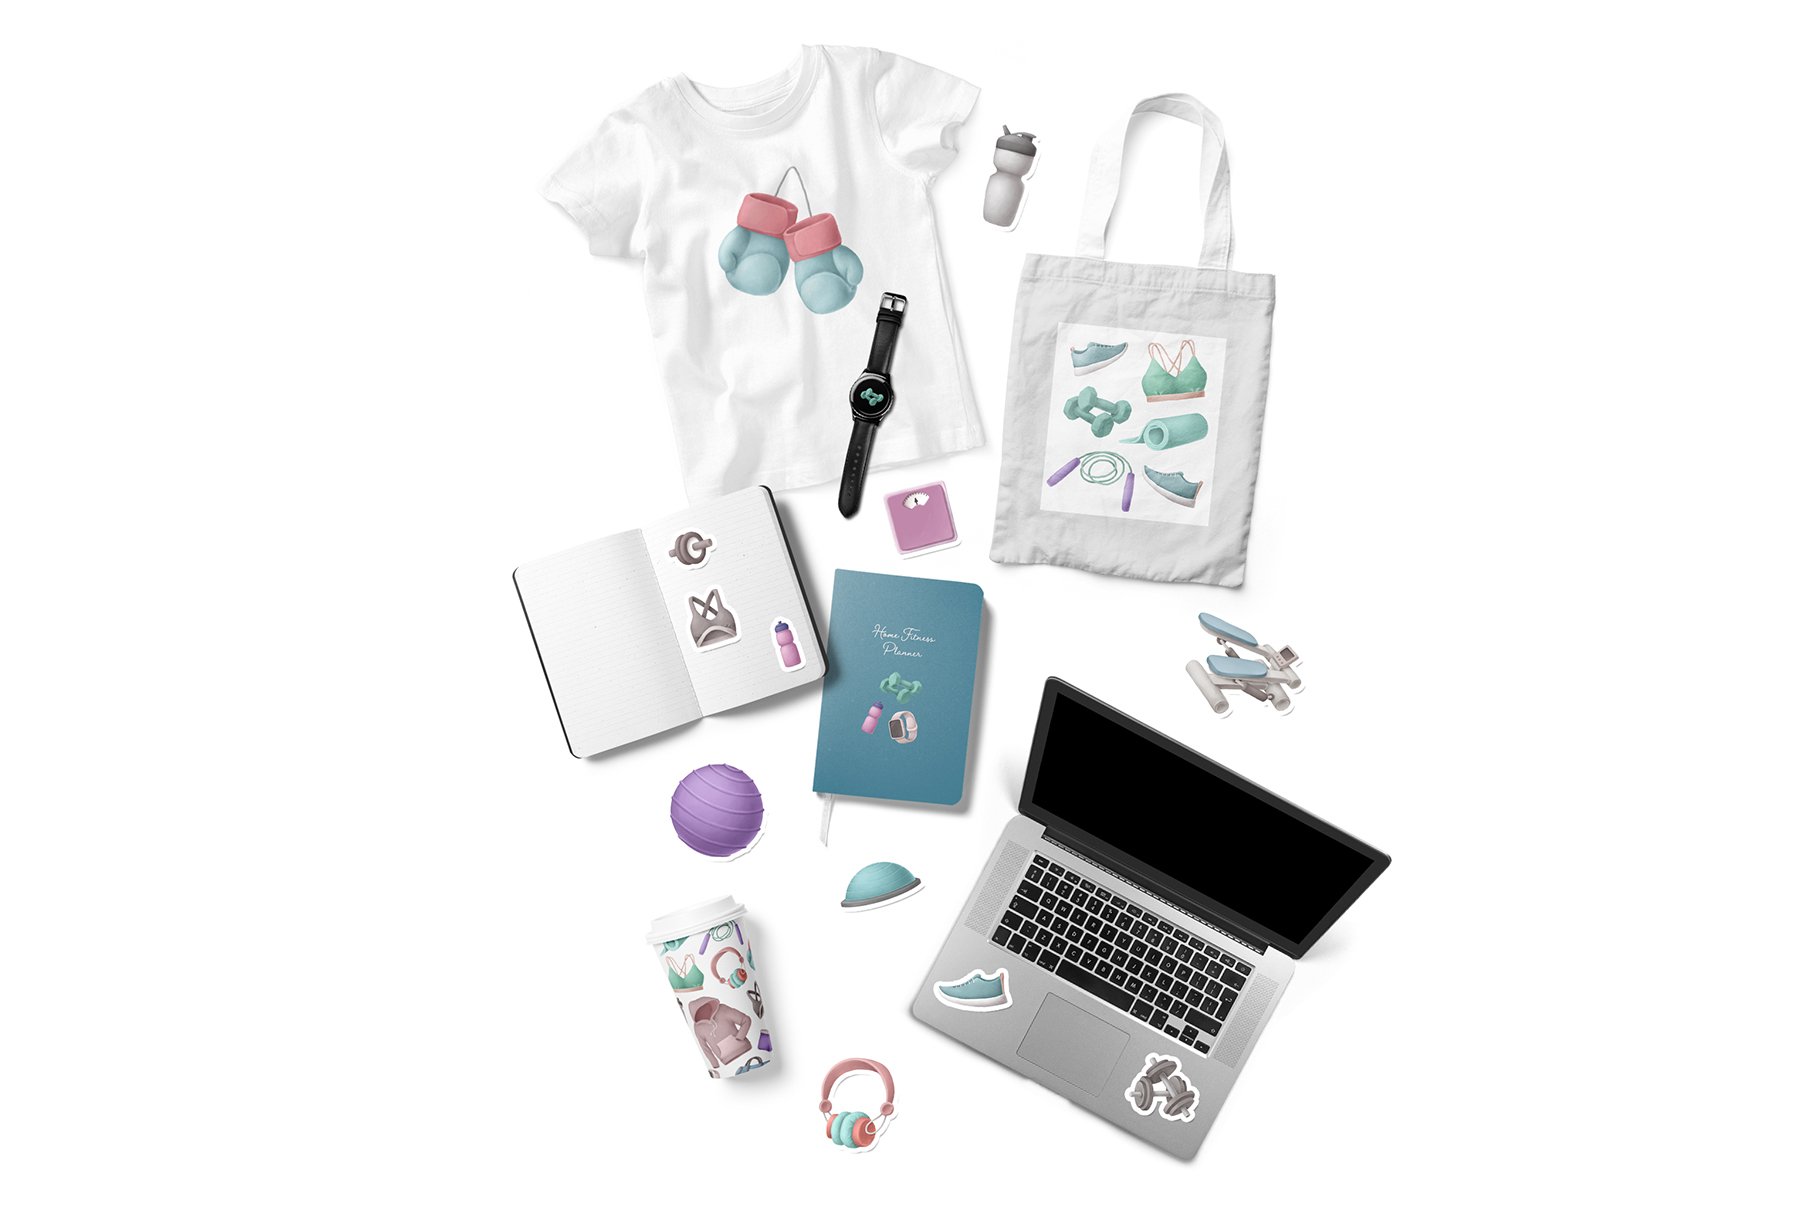 fitness printed t-shirt, fitness print bag, fitness stickers.